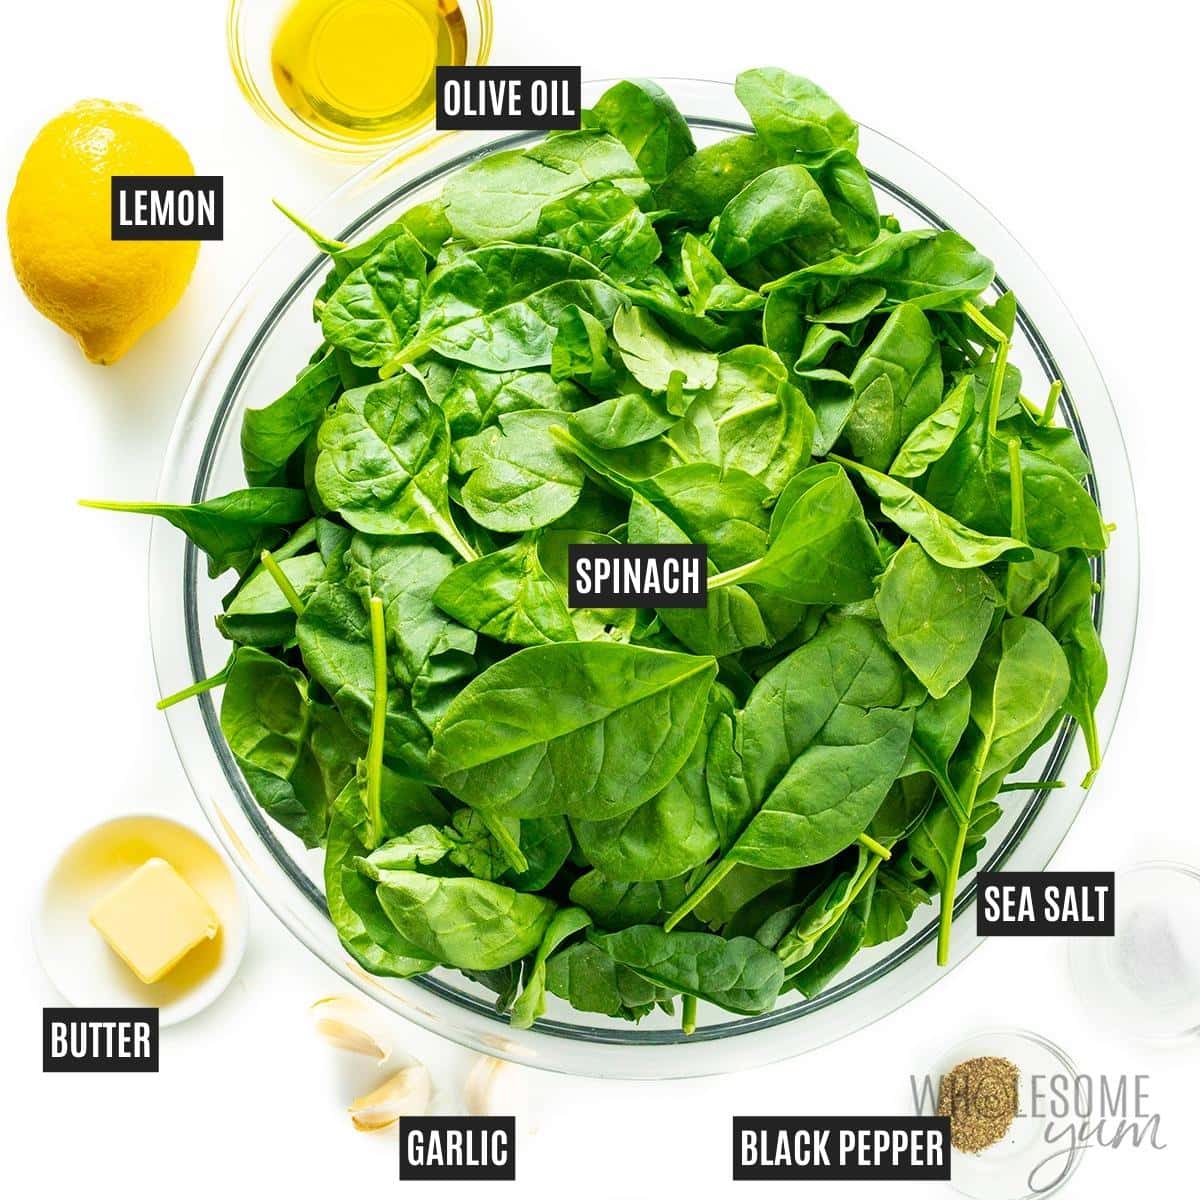 Ingredients for sauteing spinach.